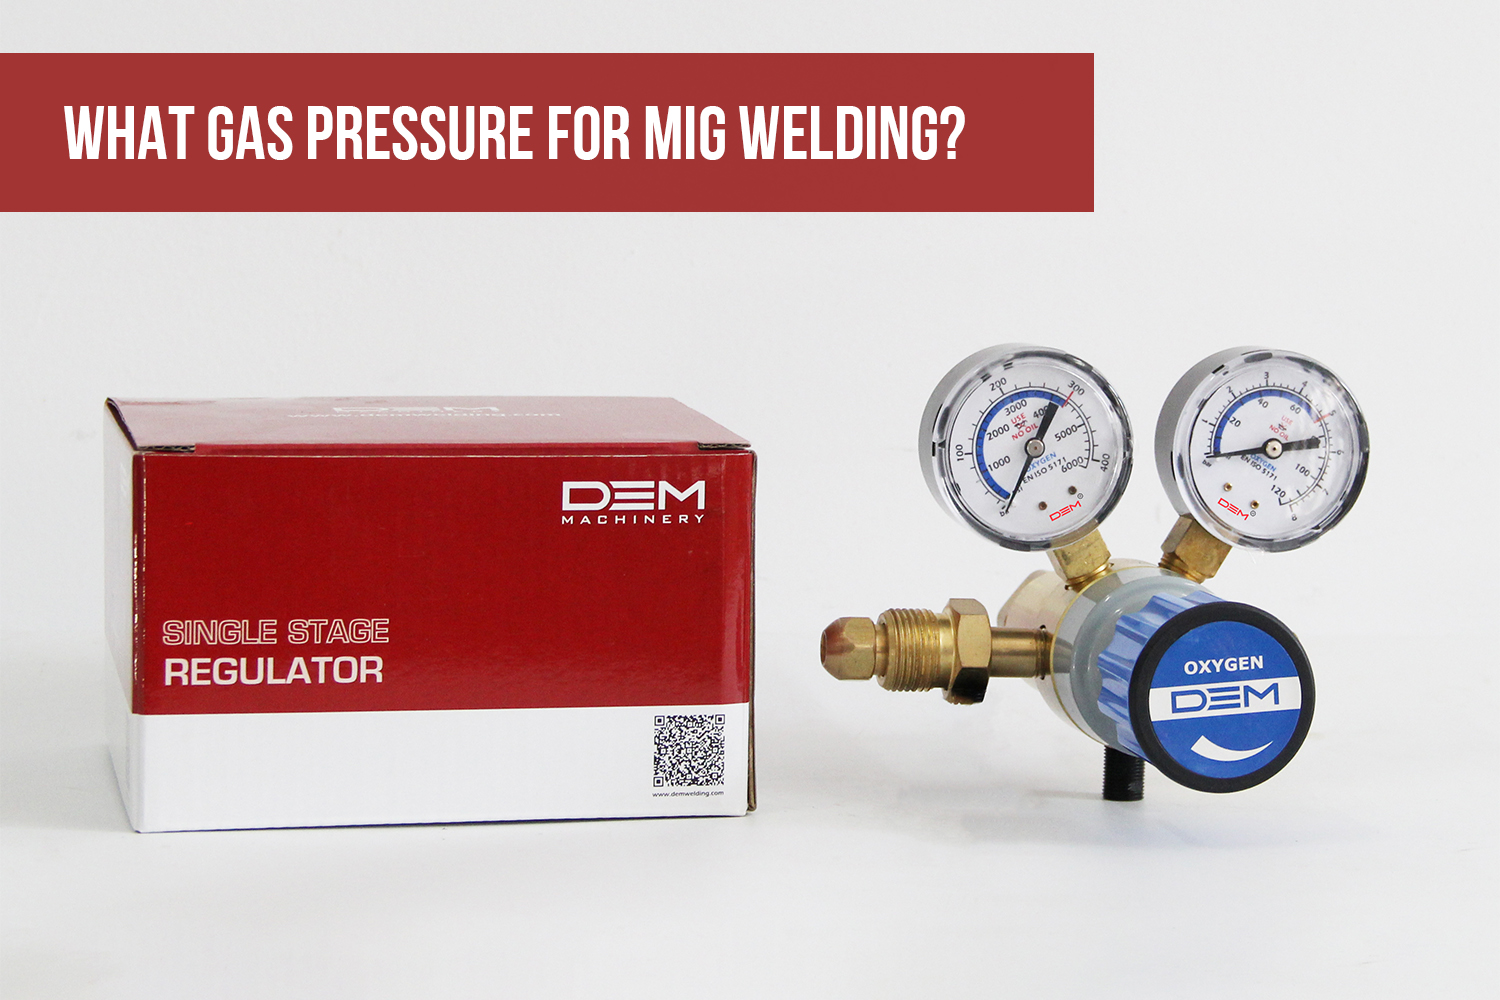 What Gas Pressure For Mig Welding?